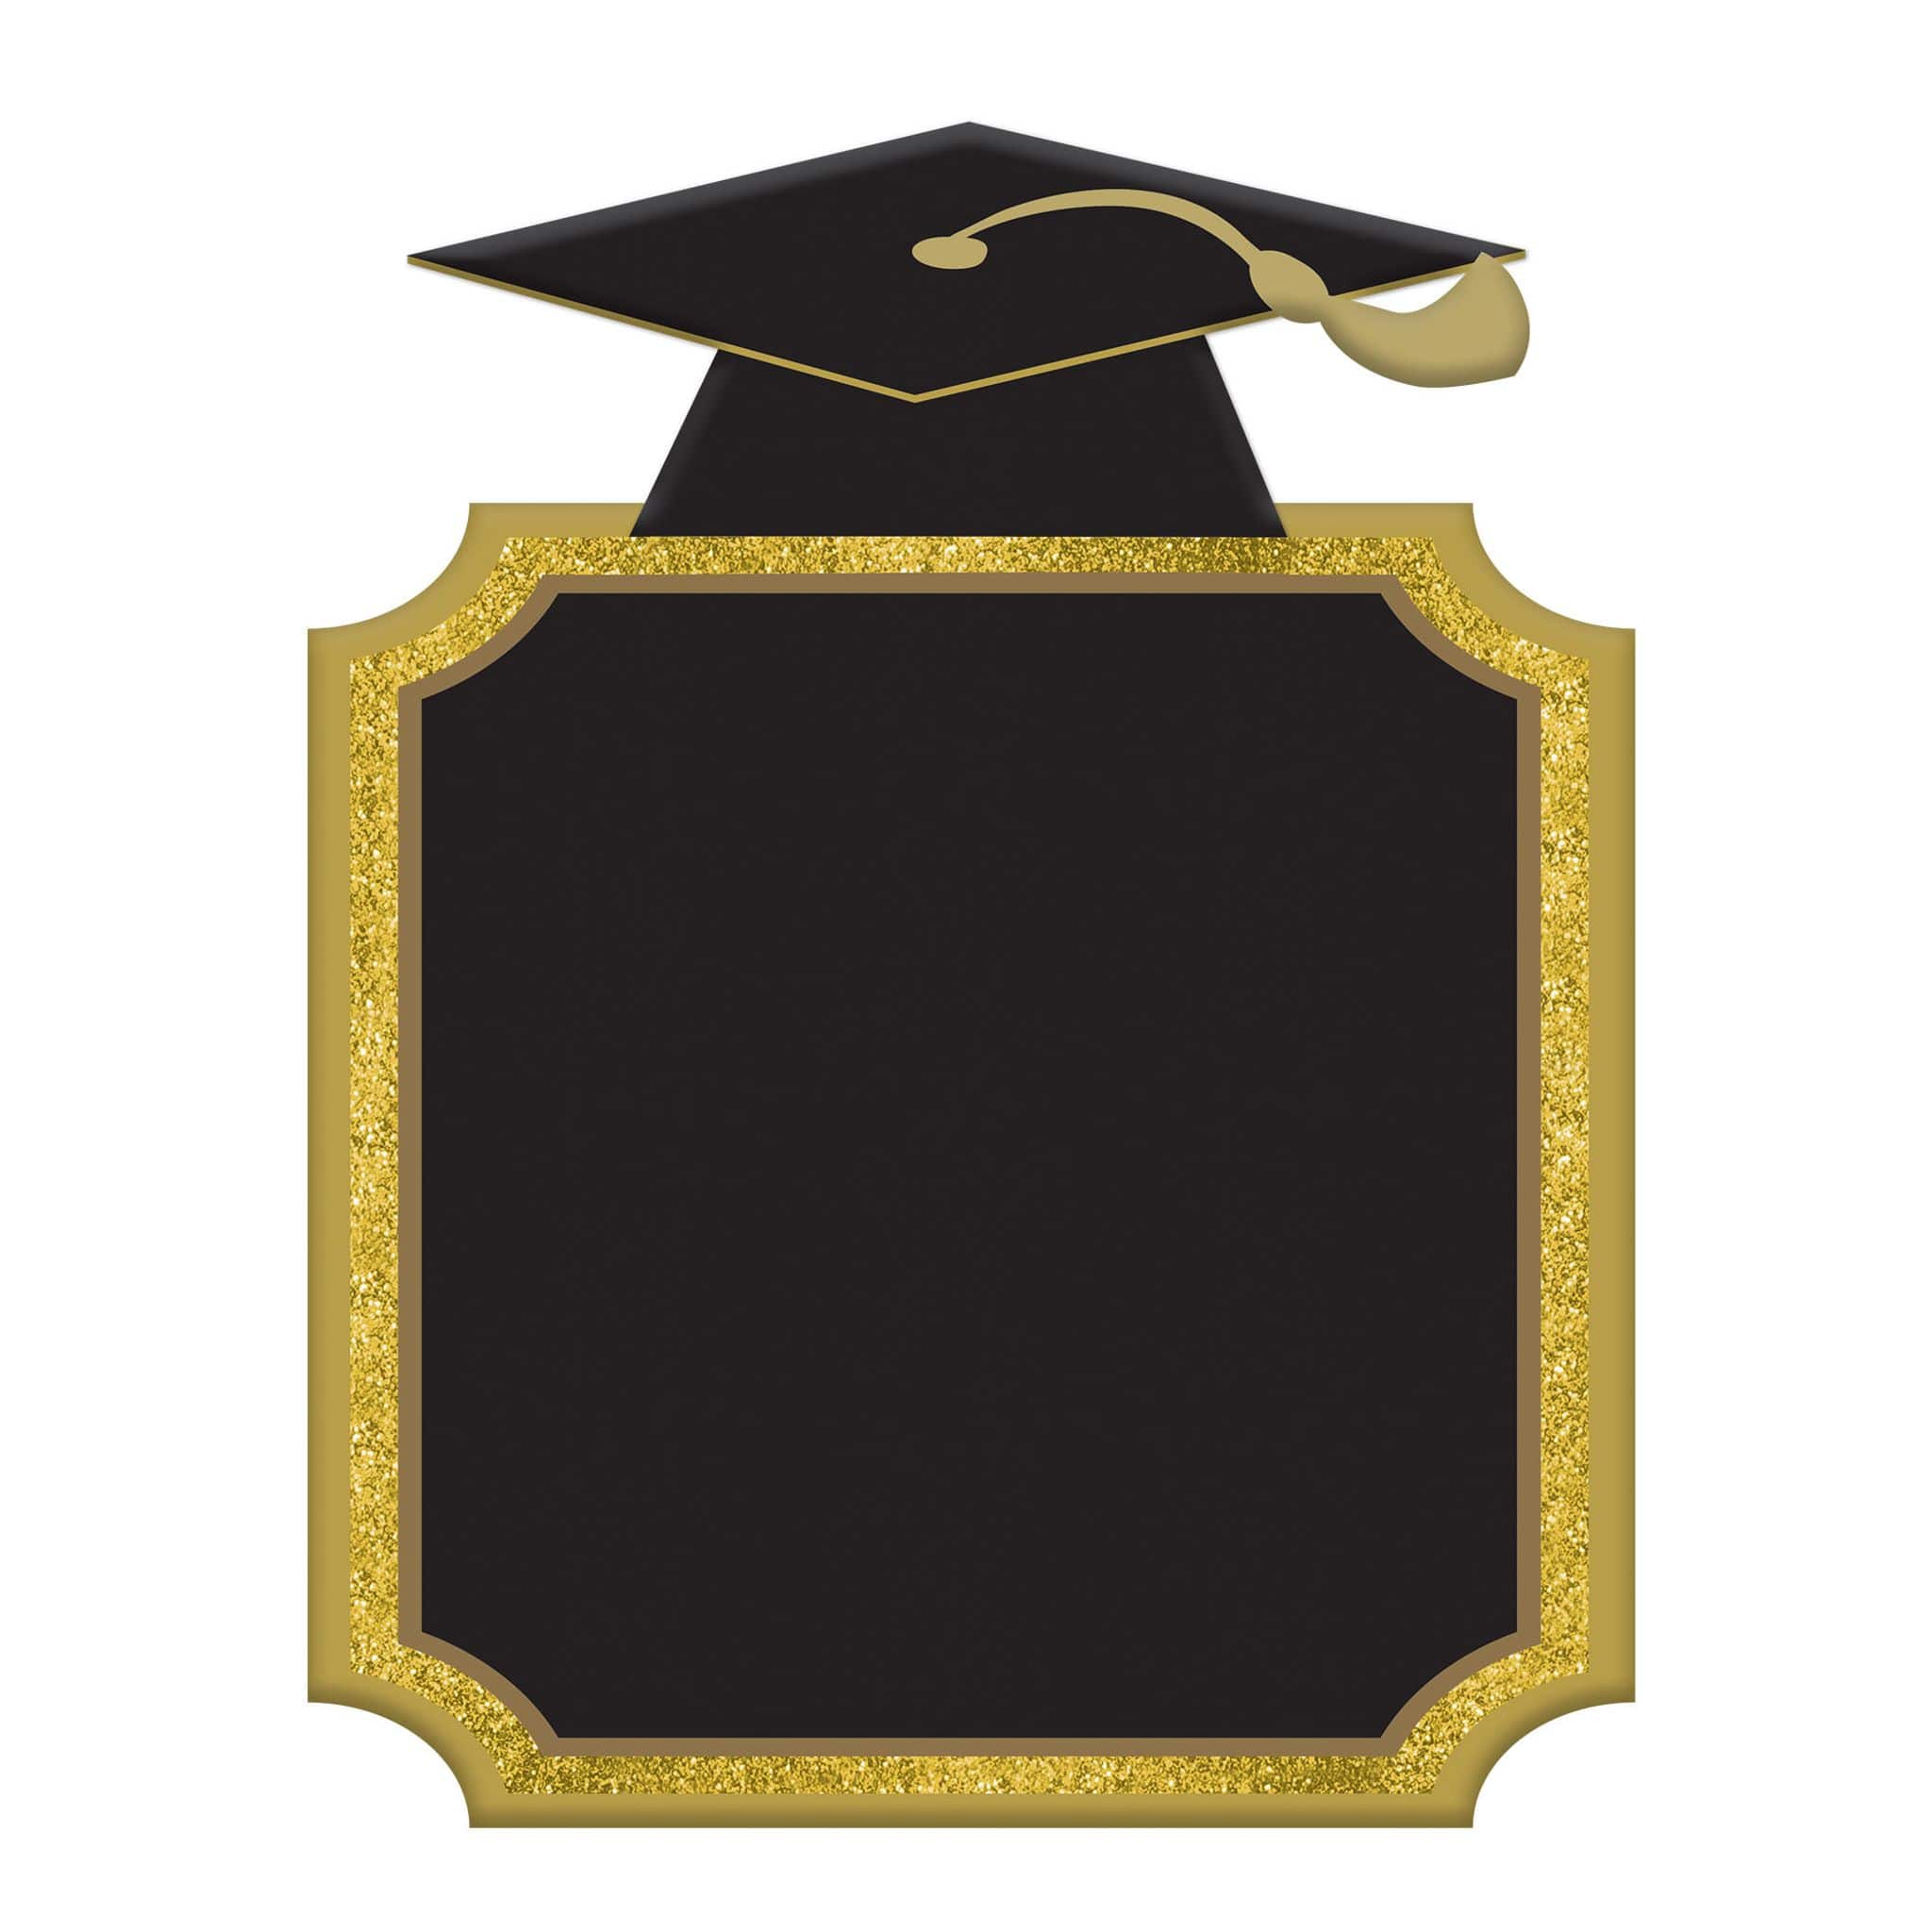 Large Chalkboard Sign With Graduation Cap